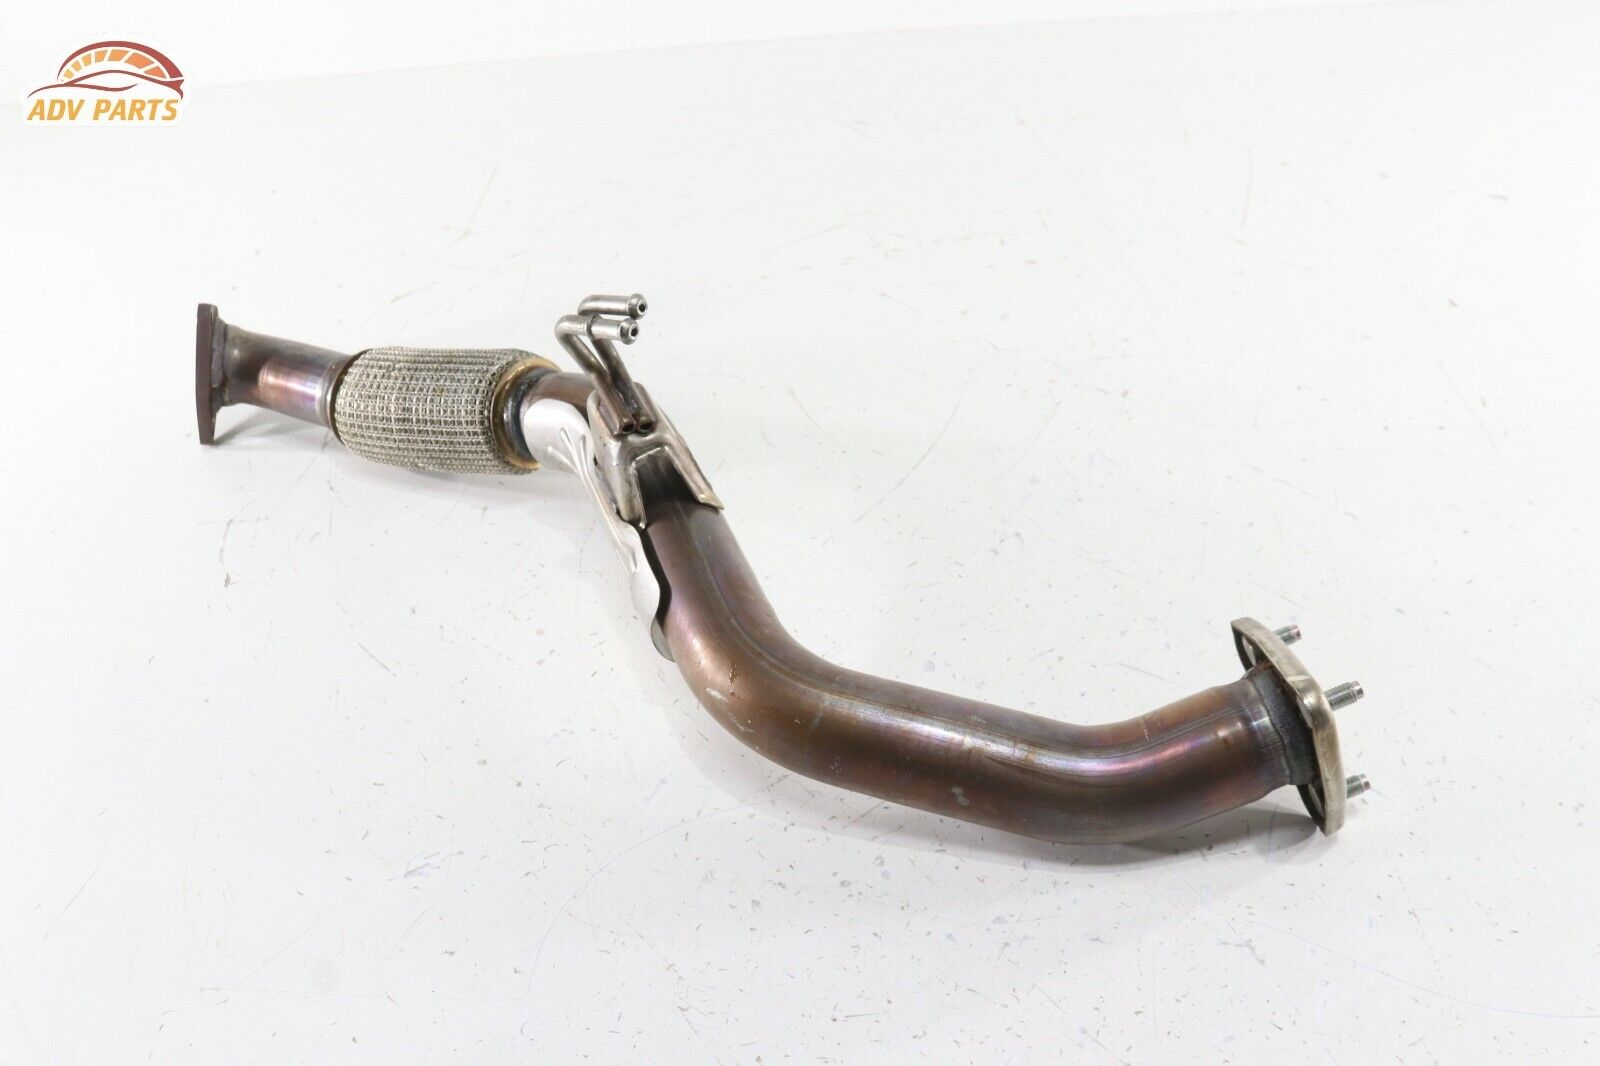 HONDA CIVIC 1.5L ENGINE EXHAUST FRONT DOWN PIPE DOWNPIPE OEM 2022 💎